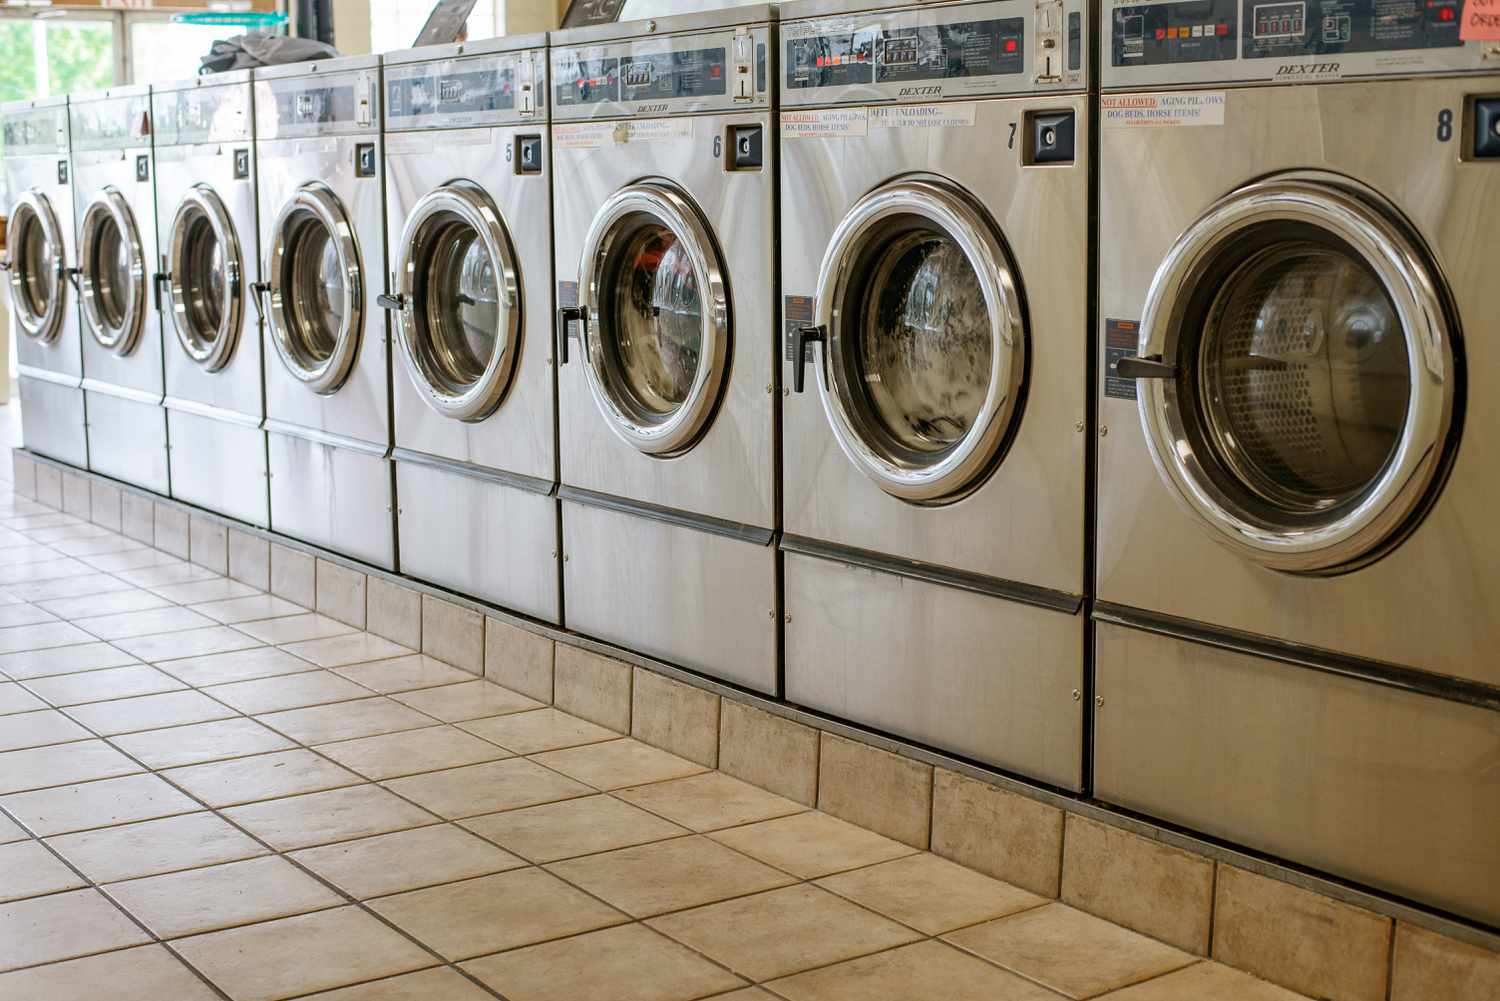 Dexter Washer And Dryer: Should I Lease Or Buy?